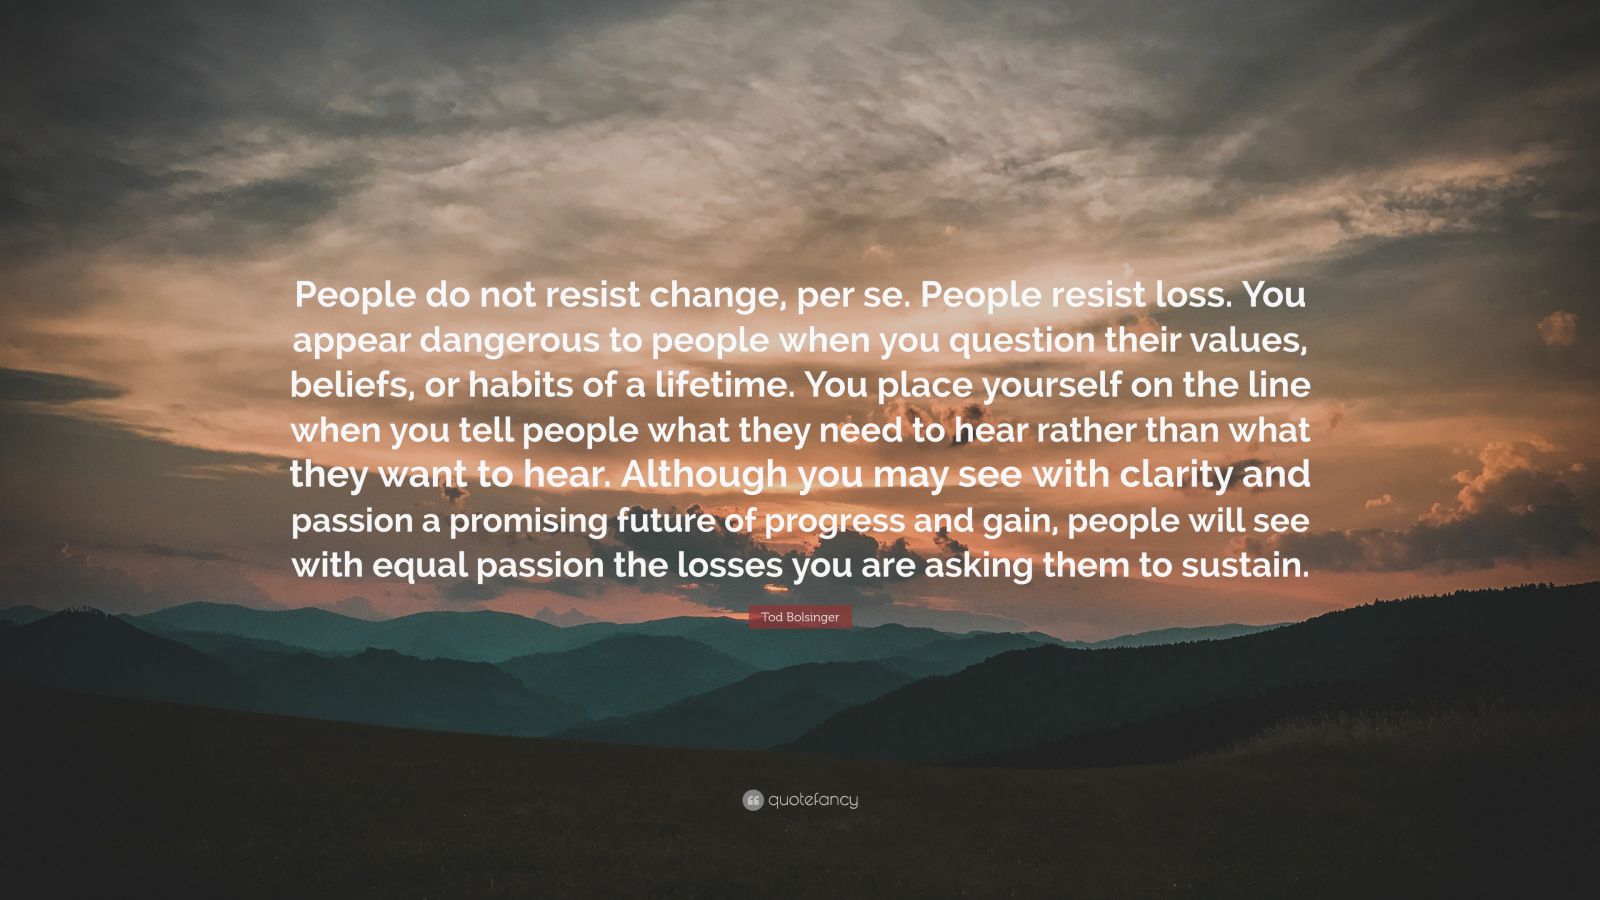 7358193 Tod Bolsinger Quote People Do Not Resist Change Per Se People 